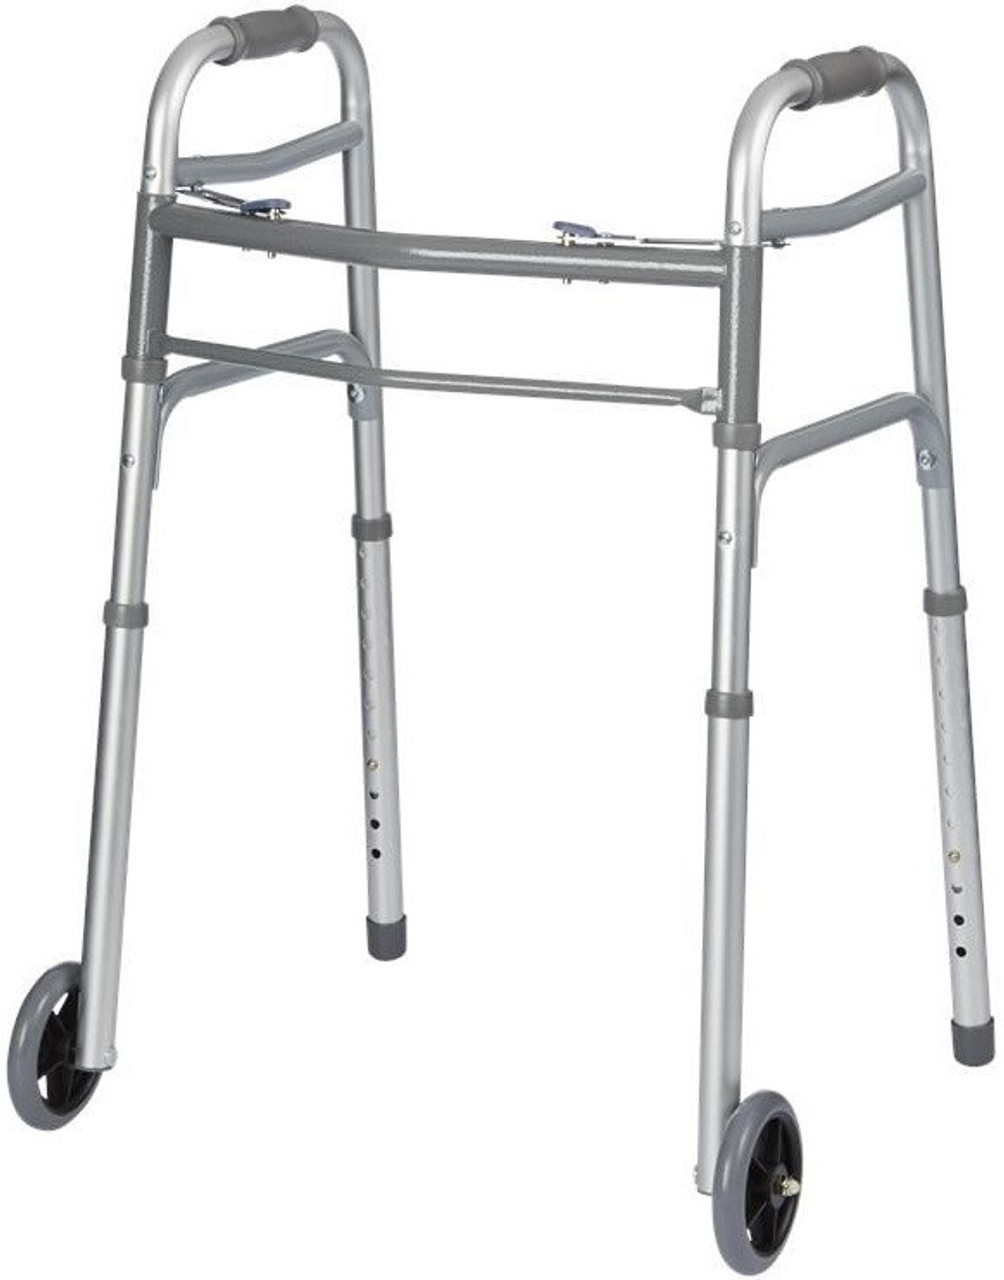 Universal Folding Walker with Two 5 Wheels P1305 by Lifestyle Mobility Aids